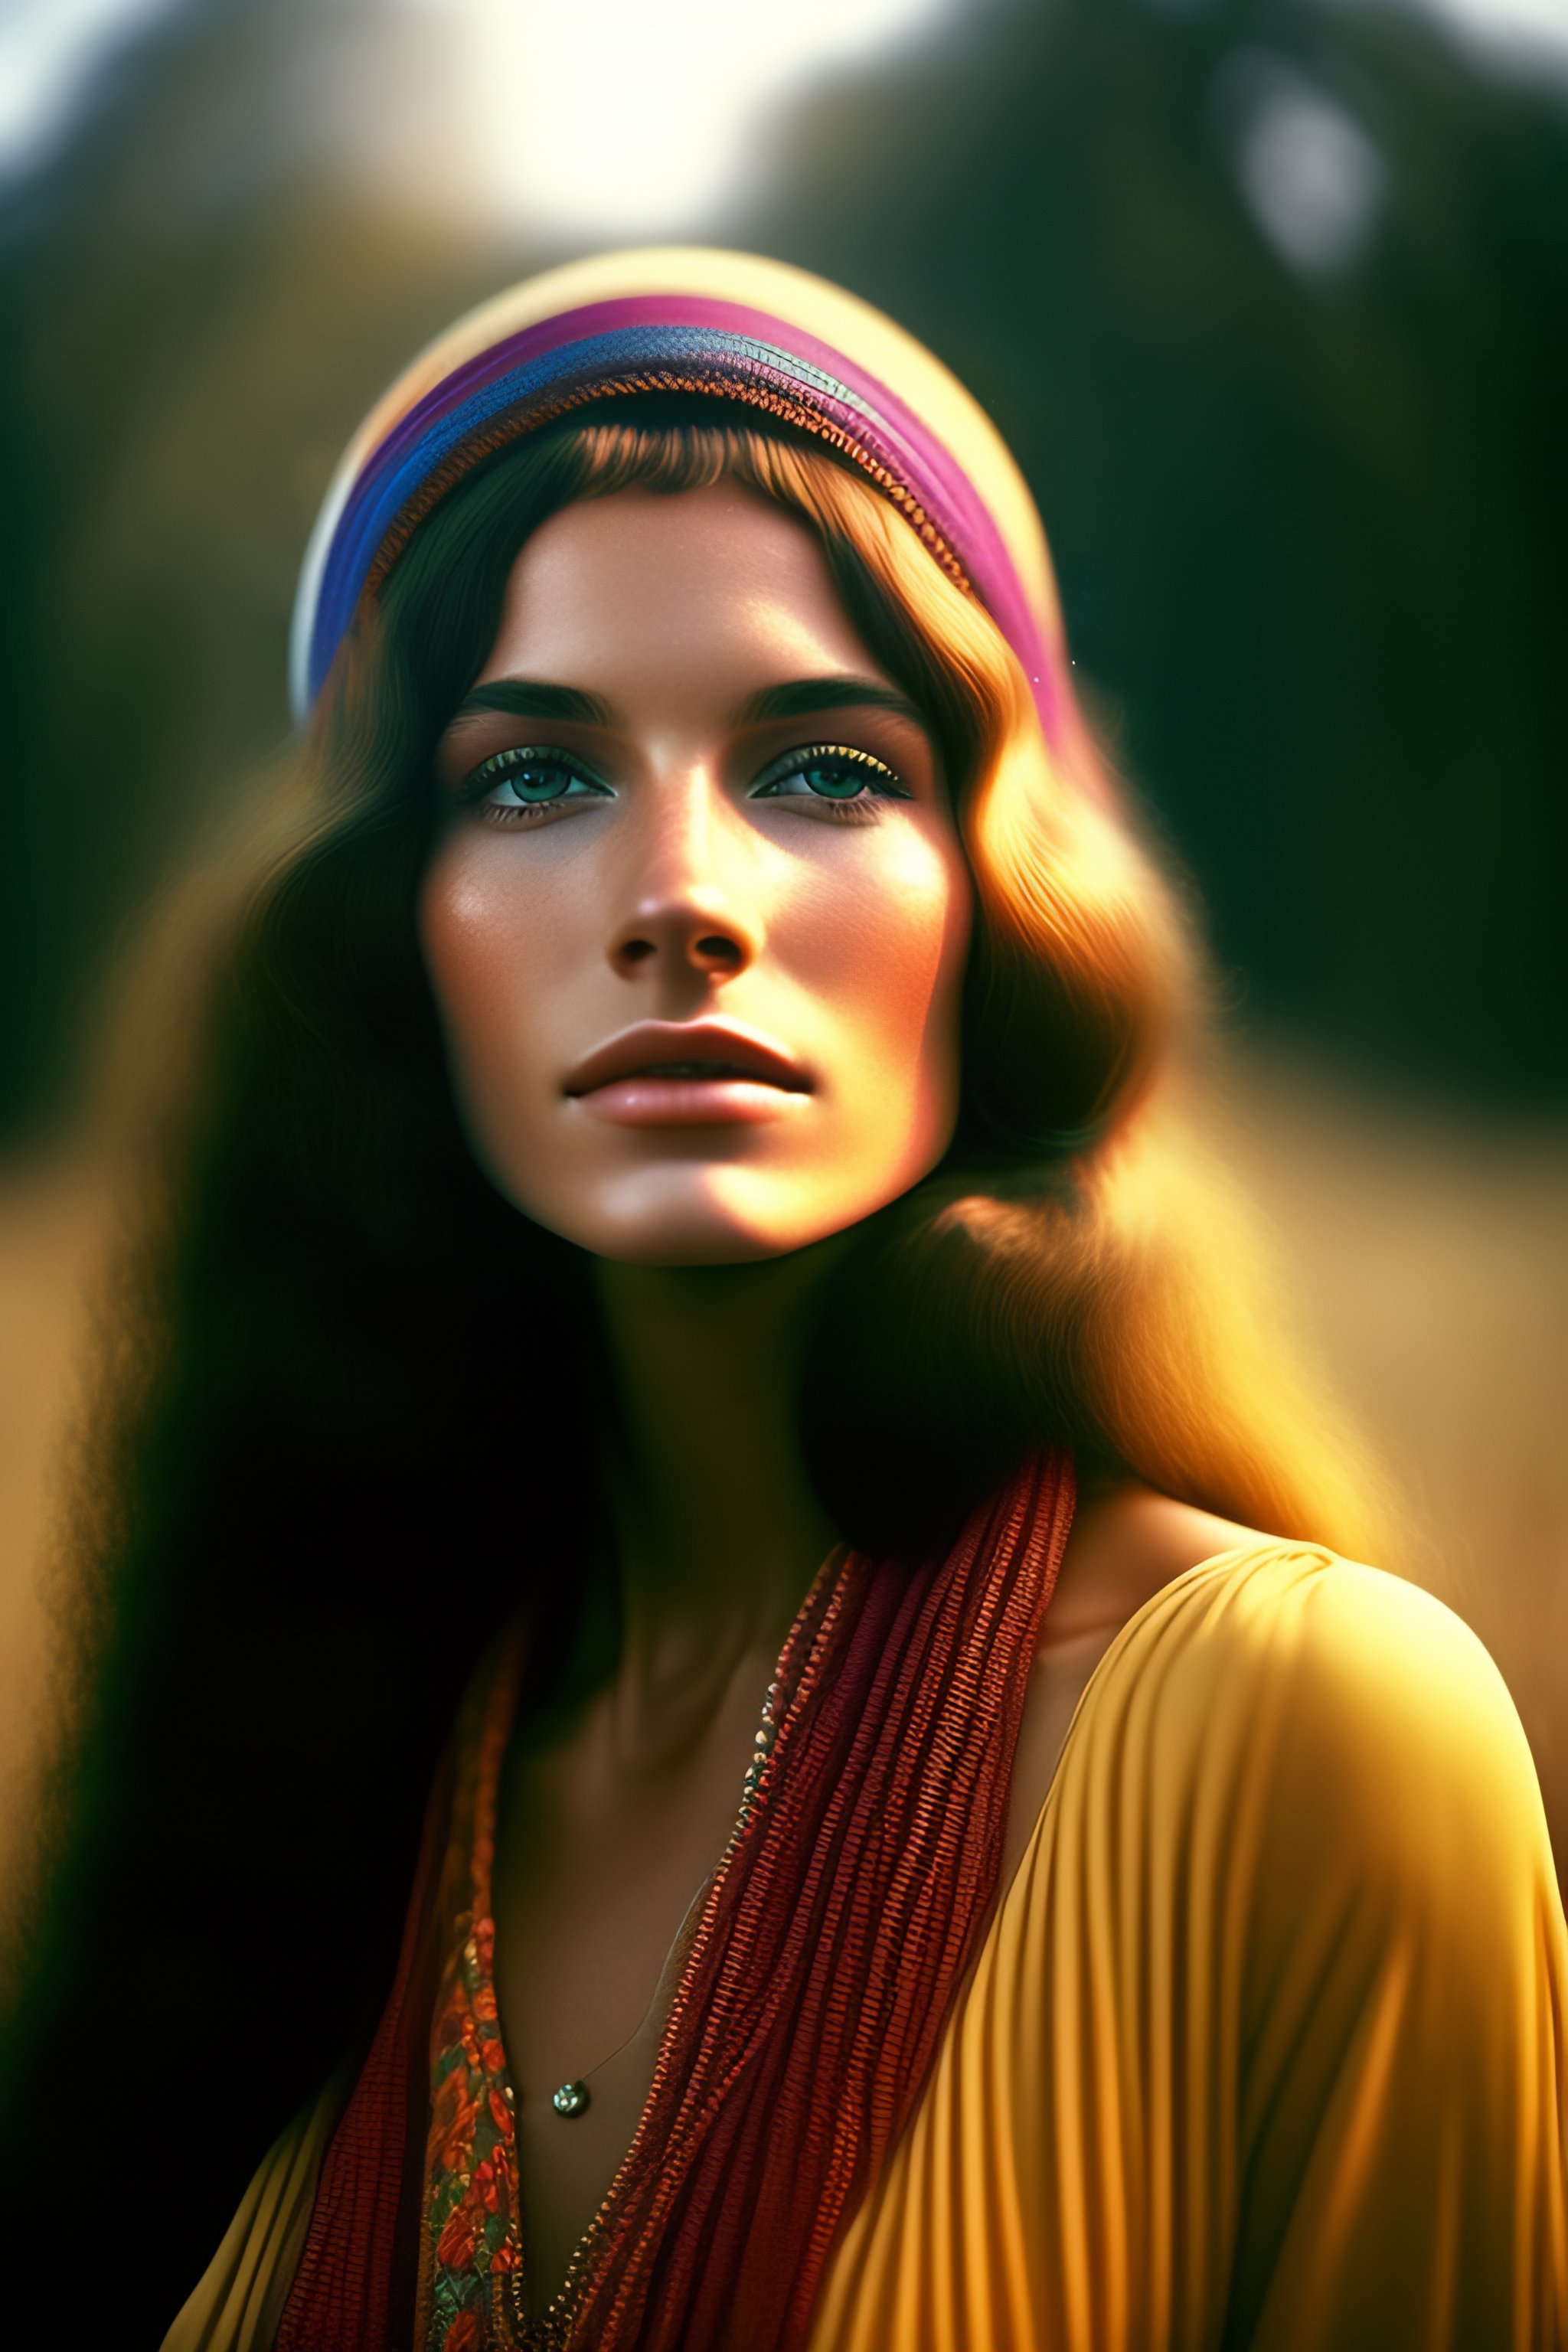 Lexica - A beautiful young woman from 1965 , hippie, Woodstock style ...